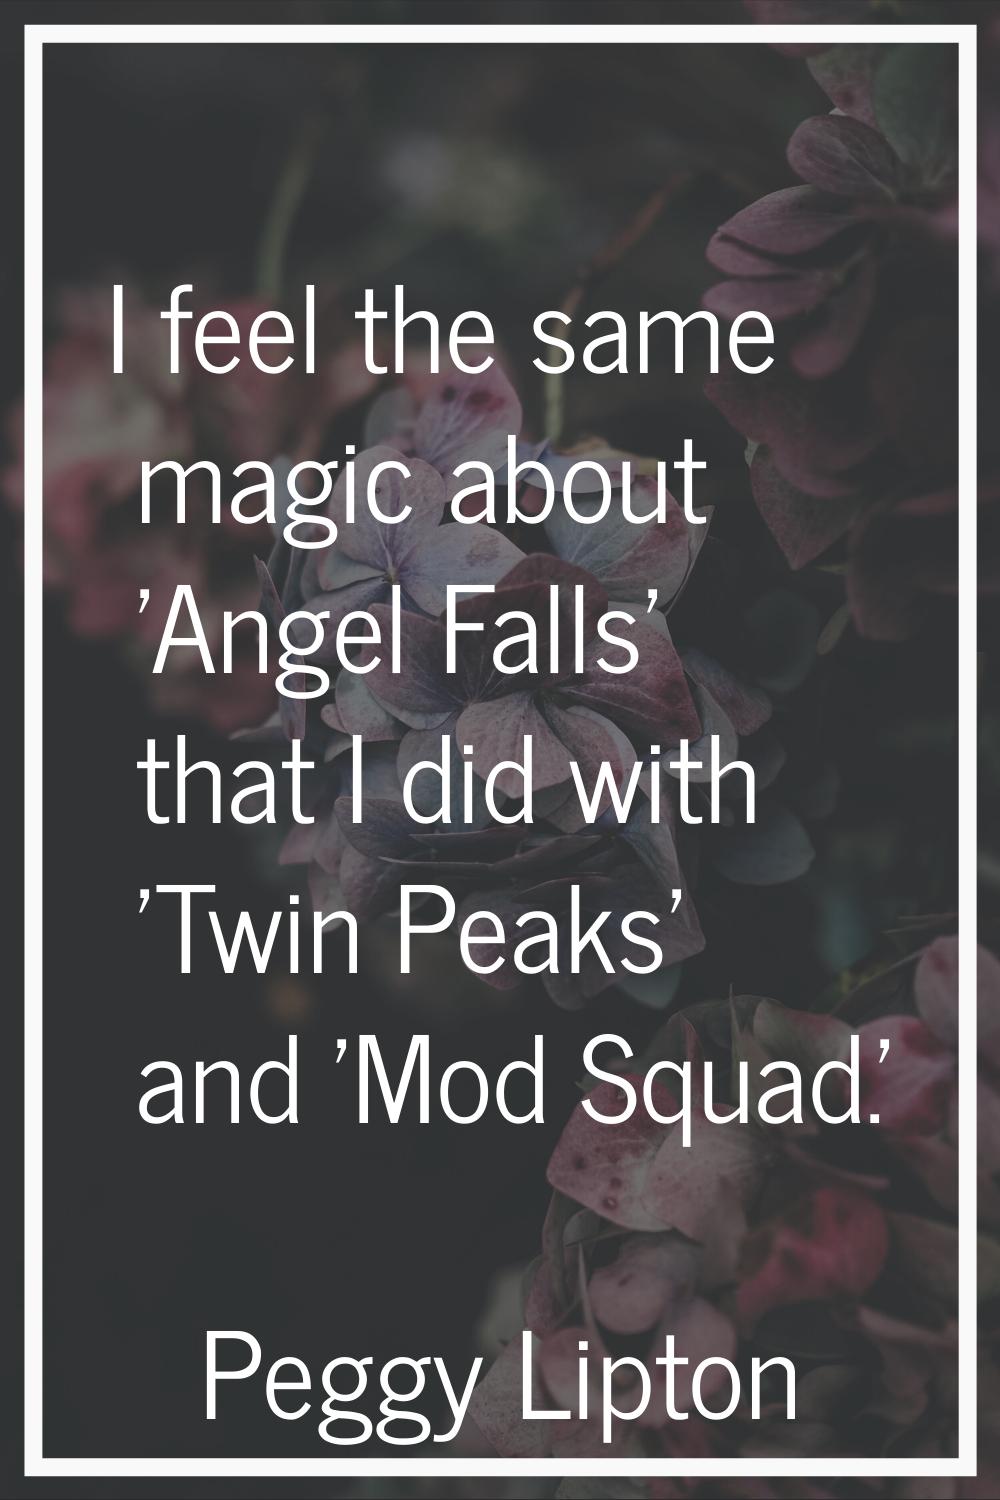 I feel the same magic about 'Angel Falls' that I did with 'Twin Peaks' and 'Mod Squad.'